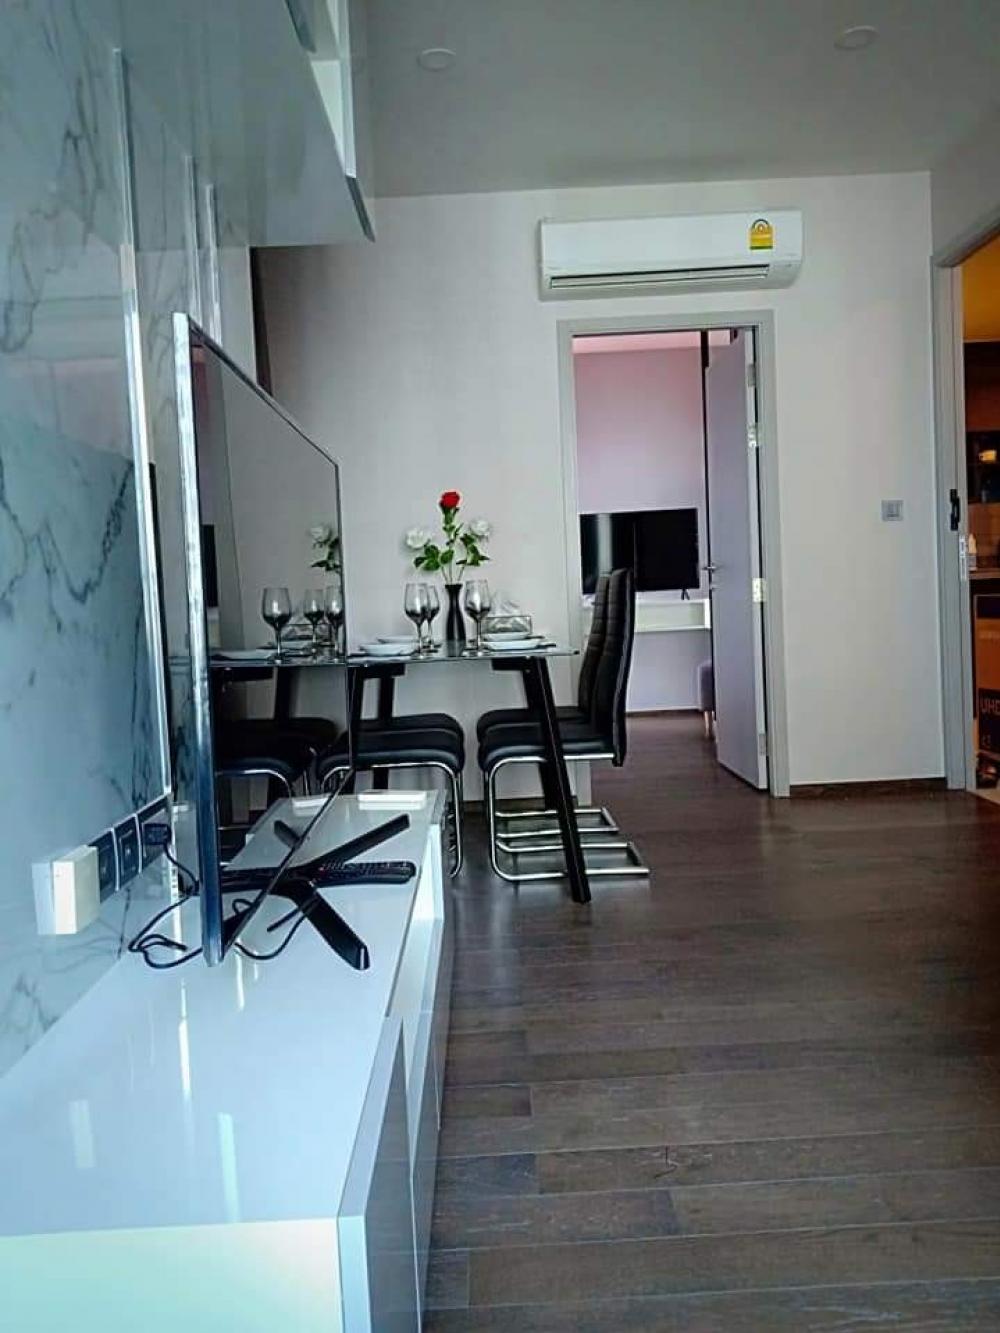 For RentCondoRatchathewi,Phayathai : #Accepting agent for rent, Condo Ideo Q Siam Ratchathewi, 11th floor, size 51 sq m, 2 bedrooms (1 large bed, 1 small bed), 1 bathroom. There is a living room zone. and separate kitchen There is a balcony with a view, a corner room, decorated with built-in